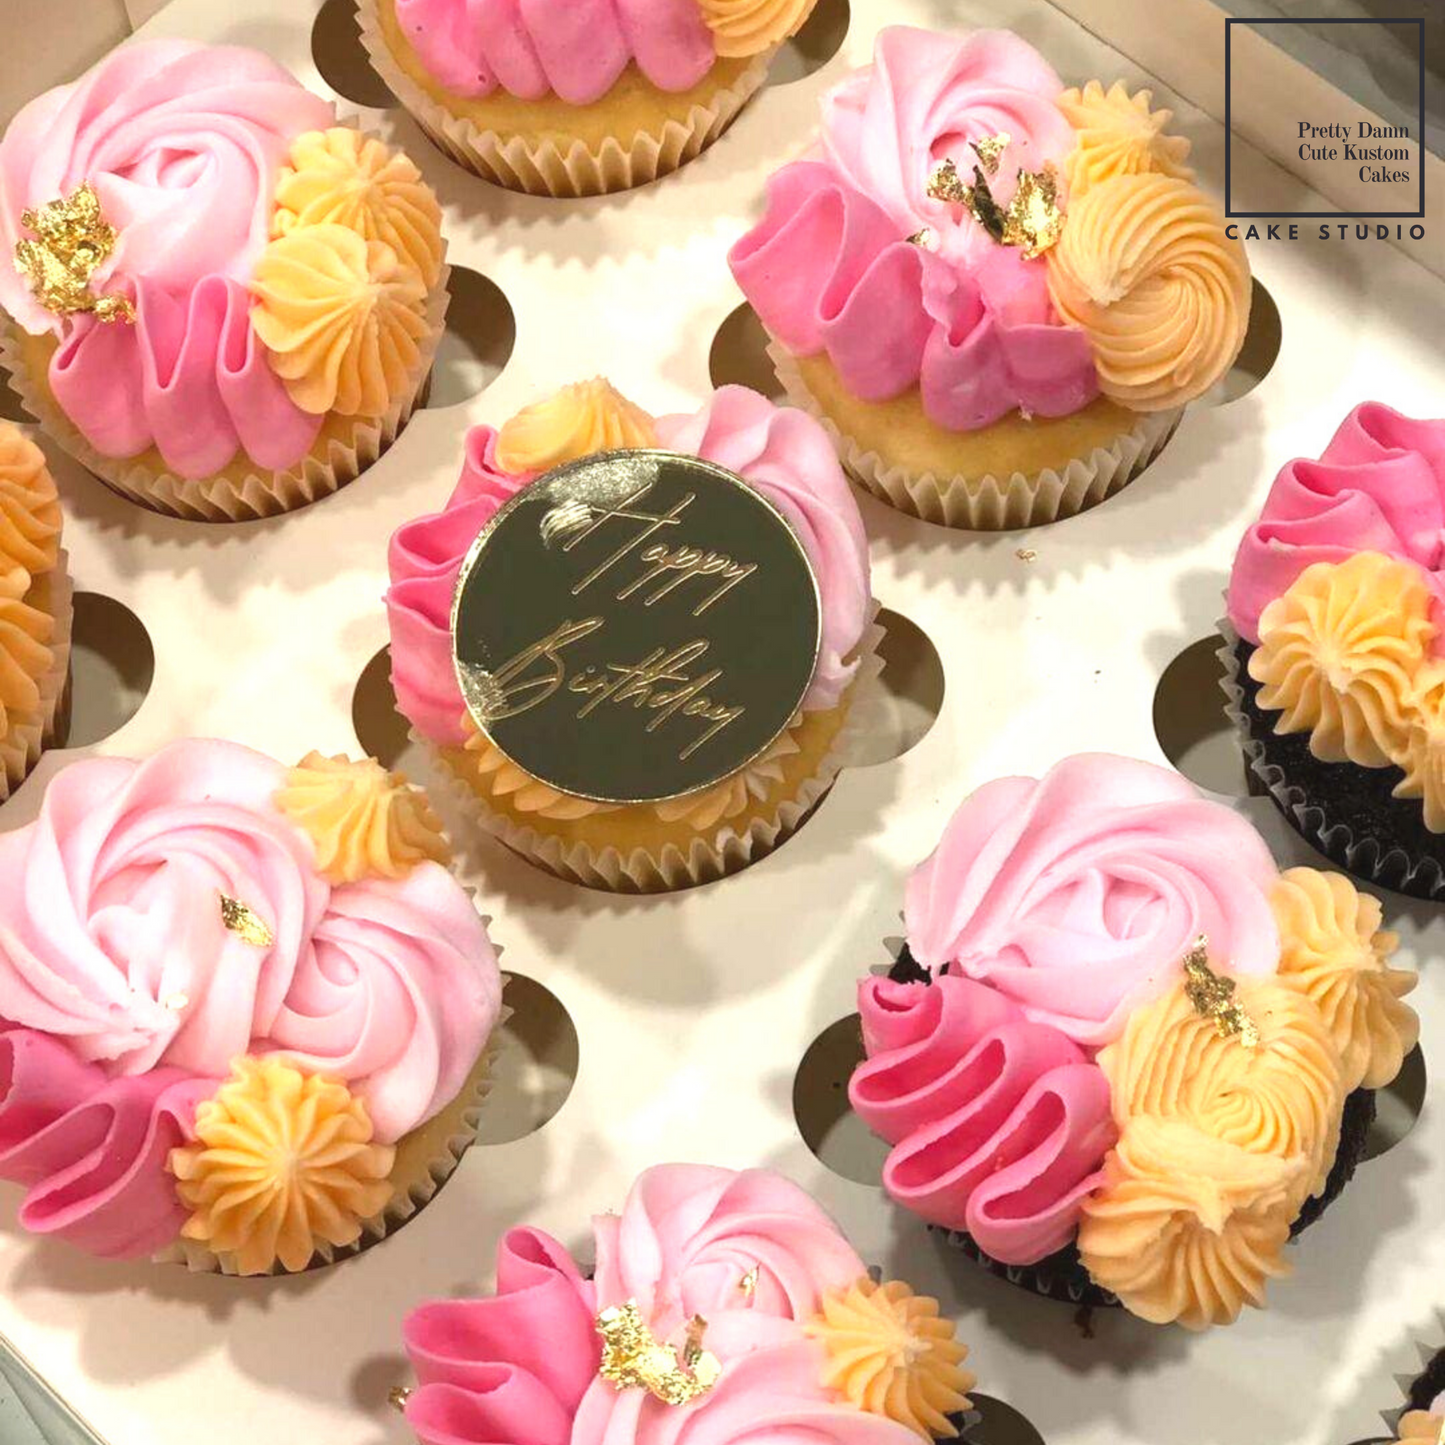 Cupcakes (Box of 12) + Gold Topper